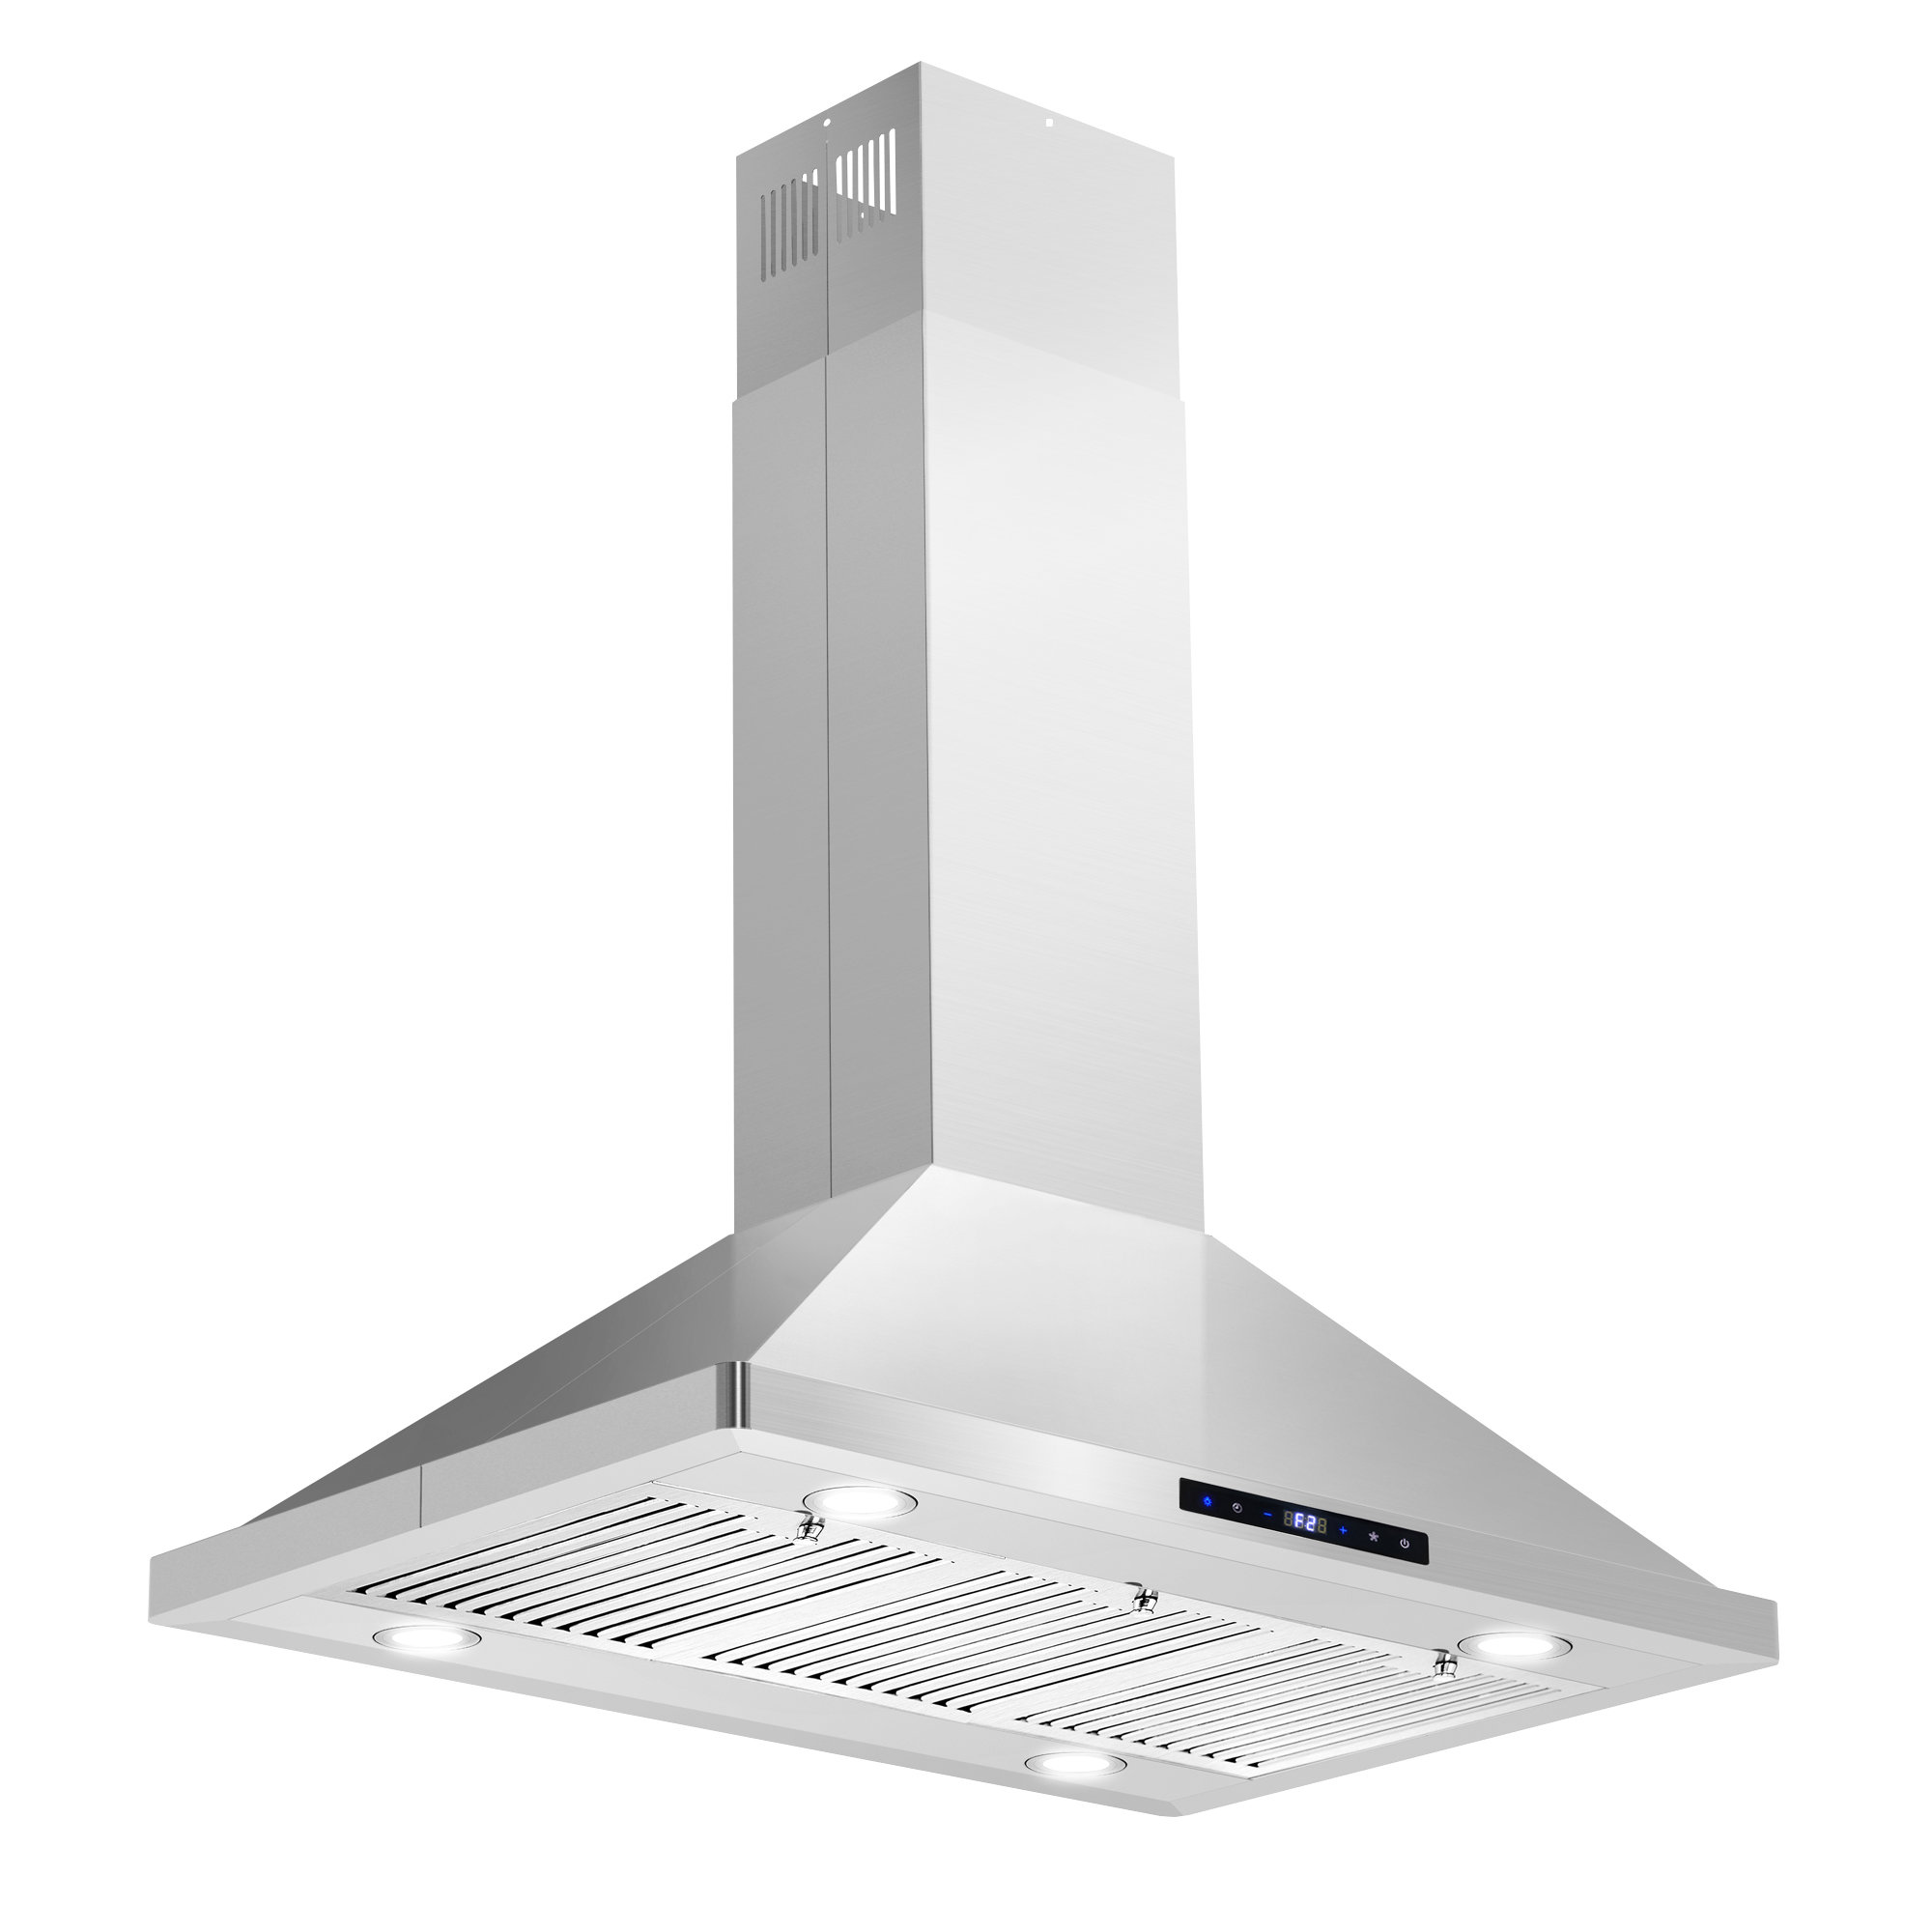 Cosmo 36 380 Cubic Feet Per Minute Ducted Island Range Hood with Baffle  Filter and Light Included & Reviews